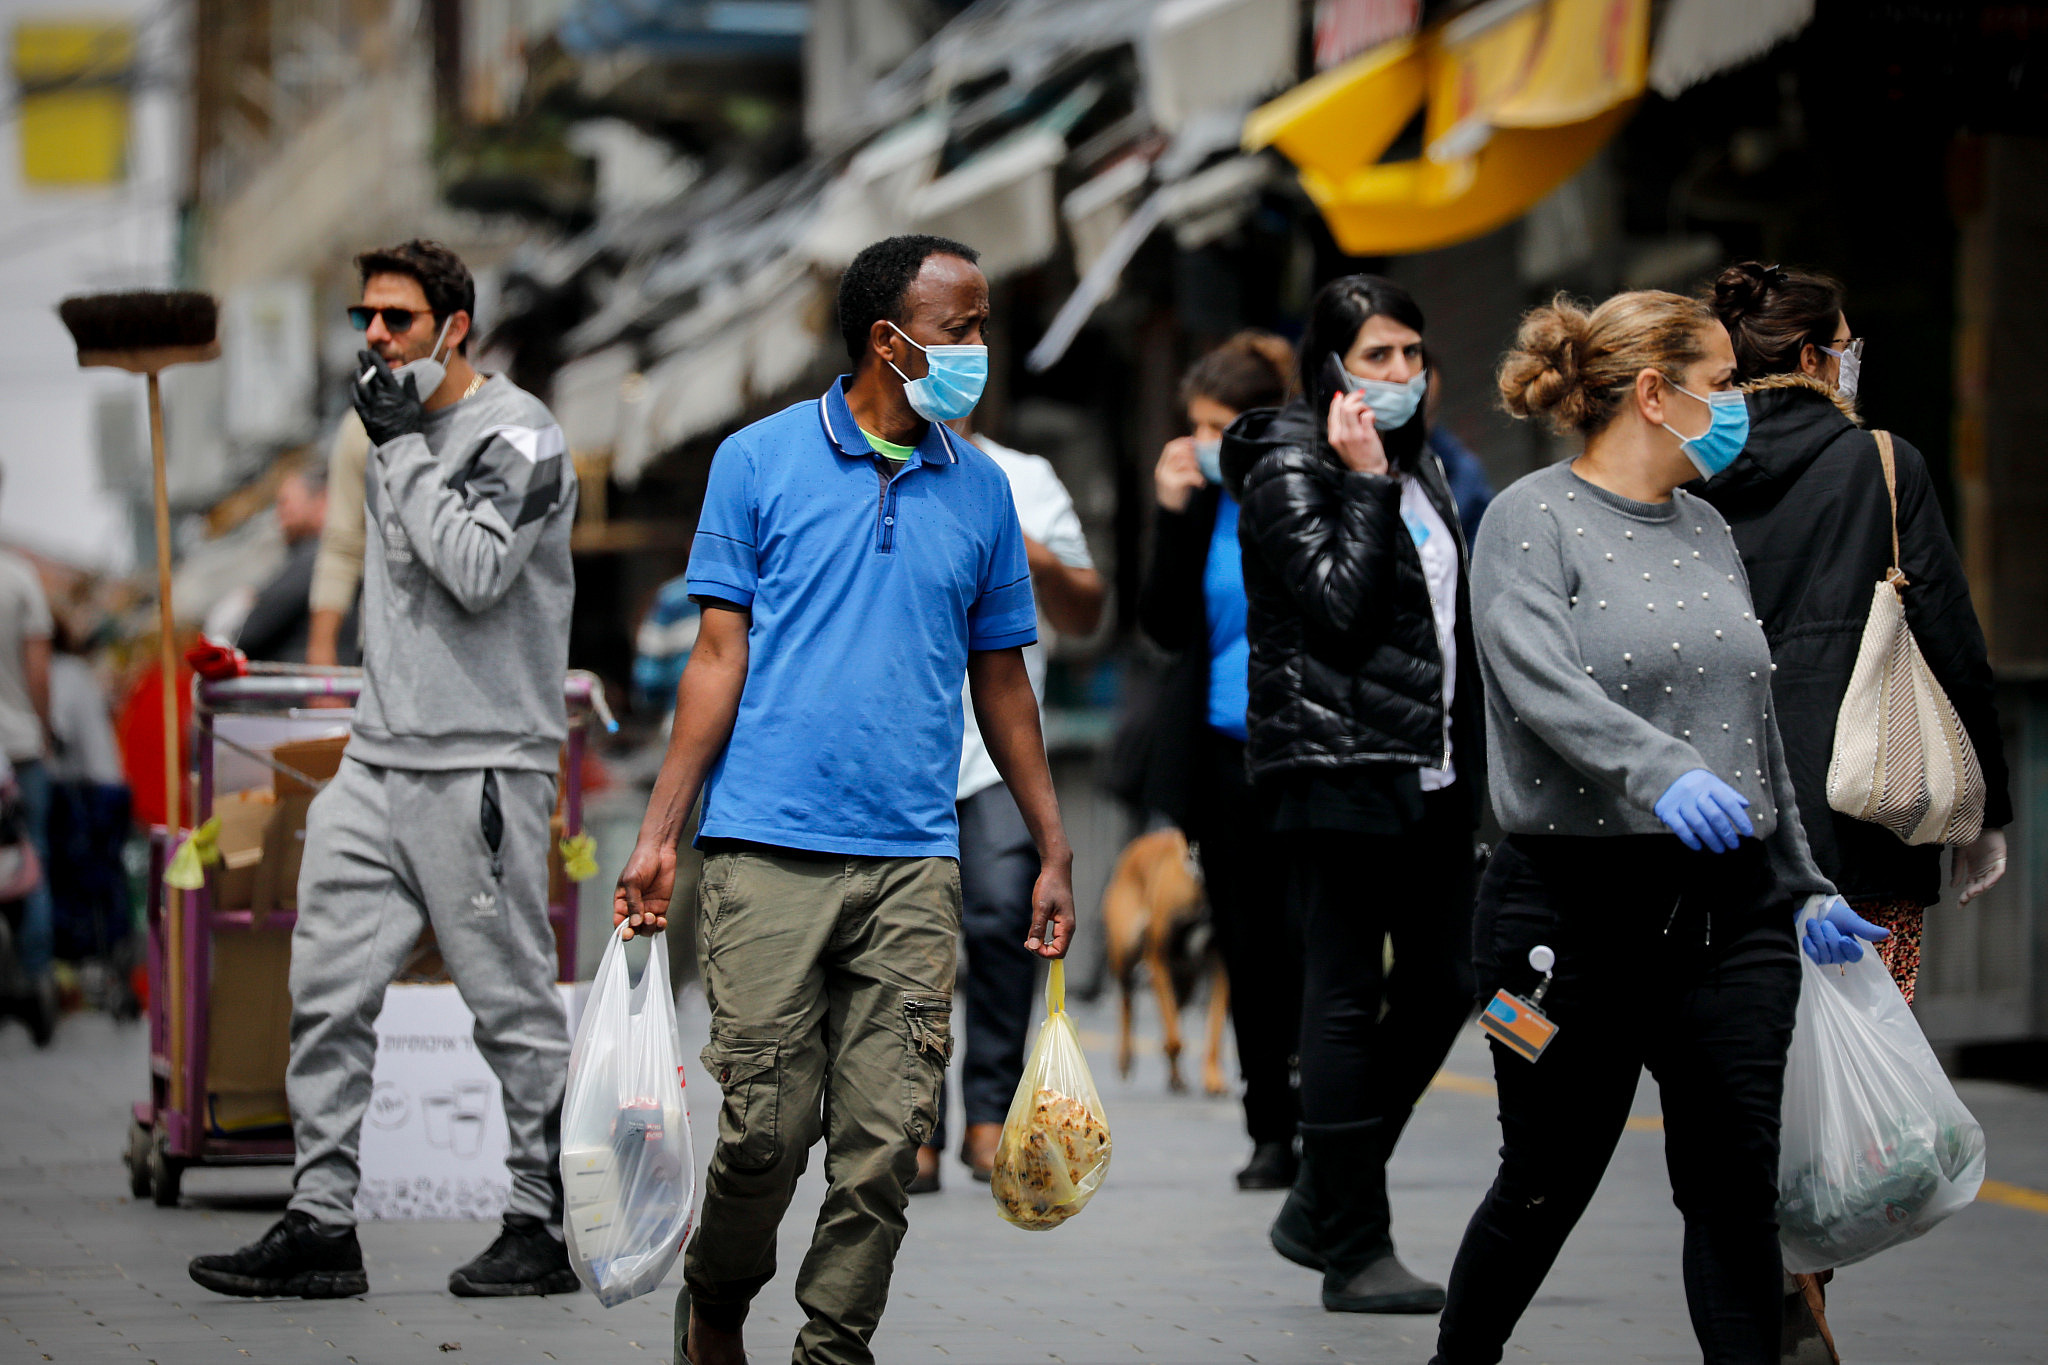 People wear protective face masks as they shop for food at the Mahane Yehuda market in Jerusalem on April 7, 2020. (Olivier Fitoussi/Flash90)